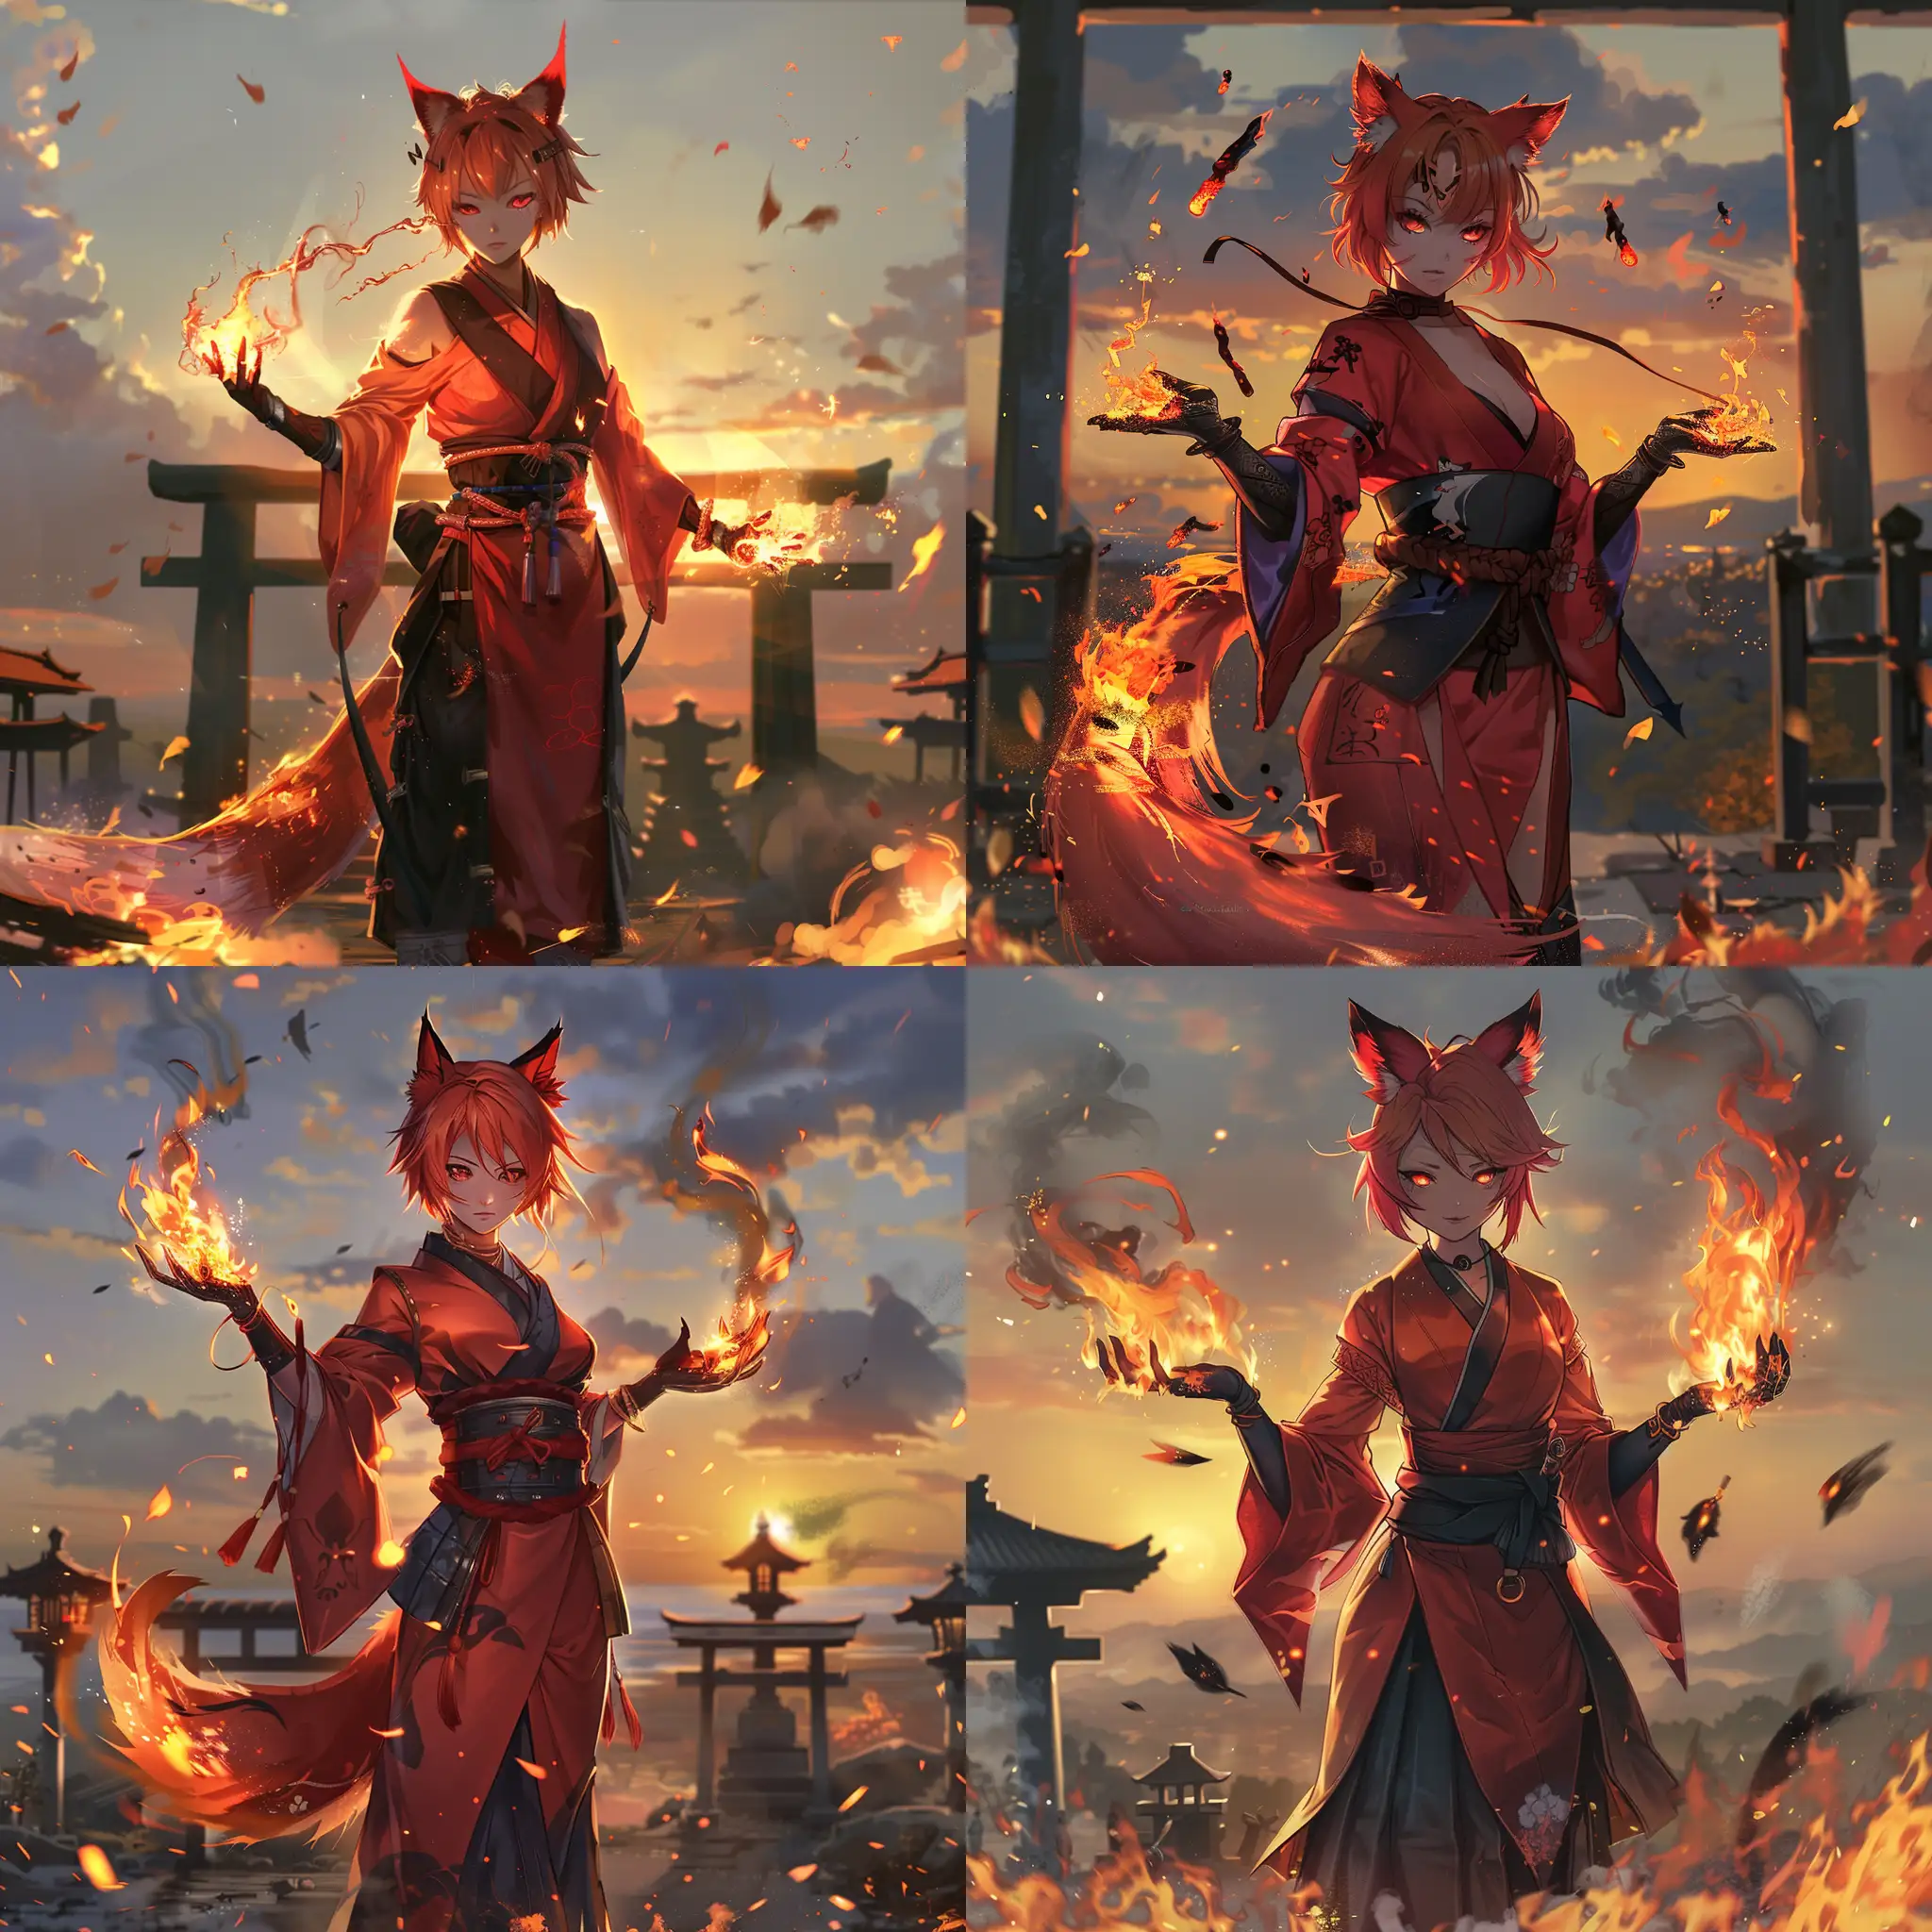 anime-style, full body, athletic, beautiful, tan skin, asian woman, short fiery red hair, red fox ears, red fox tail attached to her waist, fiery red eyes, wearing a long red kimono, black hakama, black sash, long black gloves, black leather boots, casting fire magic, hands wrapped in fire,  good anatomy, dynamic, embers falling in foreground, shinto shrine, sunset